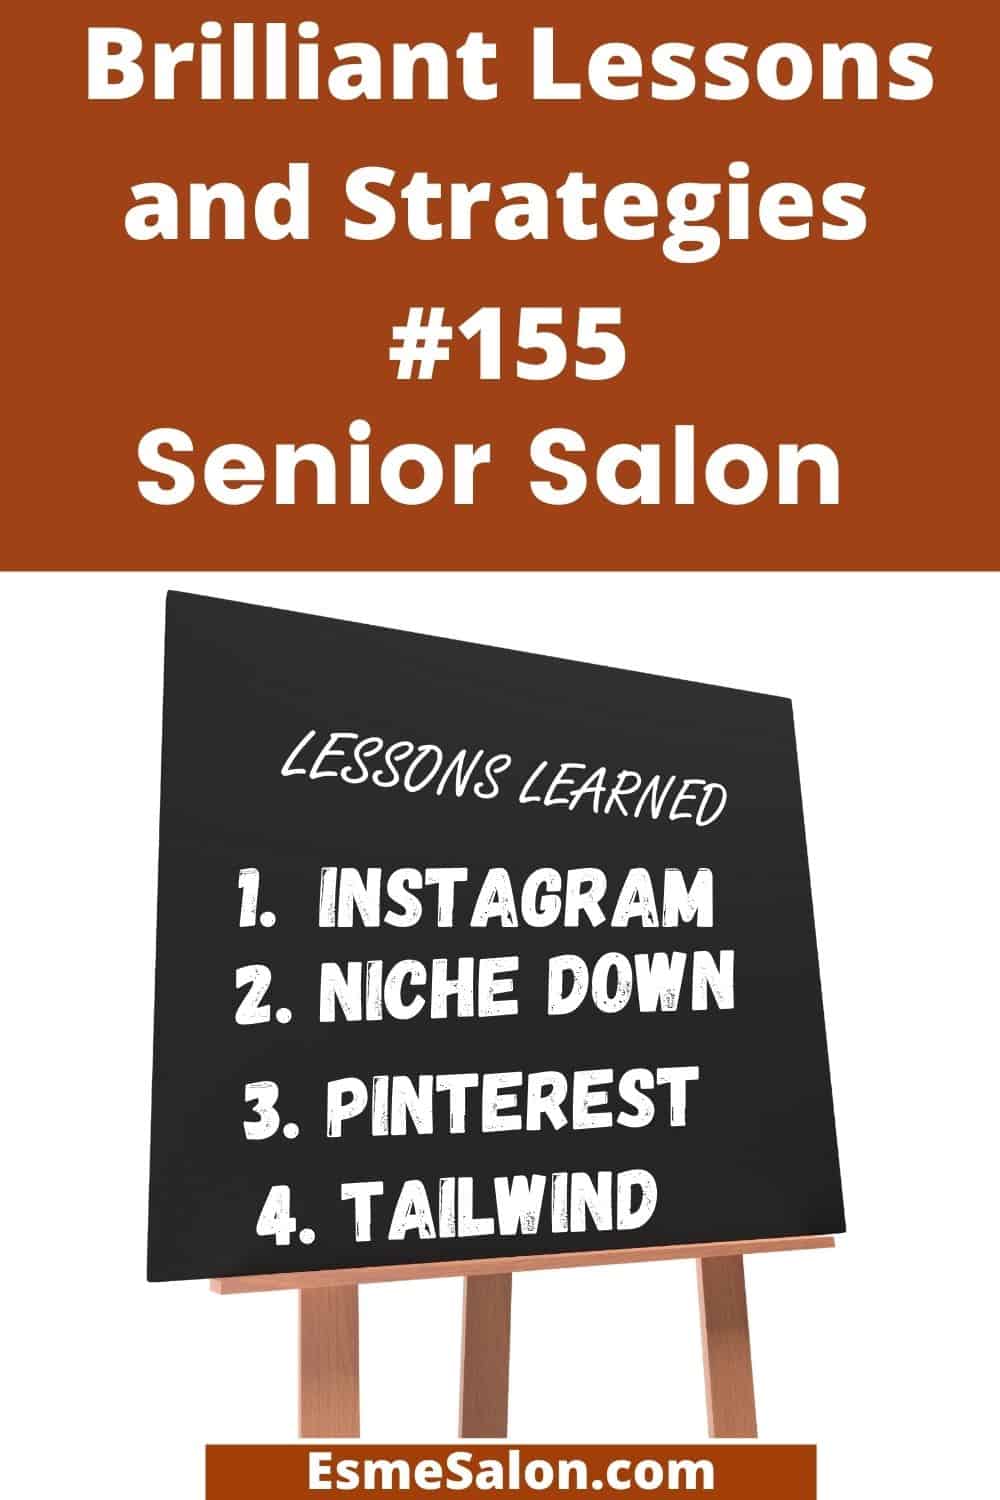 A black board with write riting, lessons learned on Instagram, niche down, Pinterest and tailwind